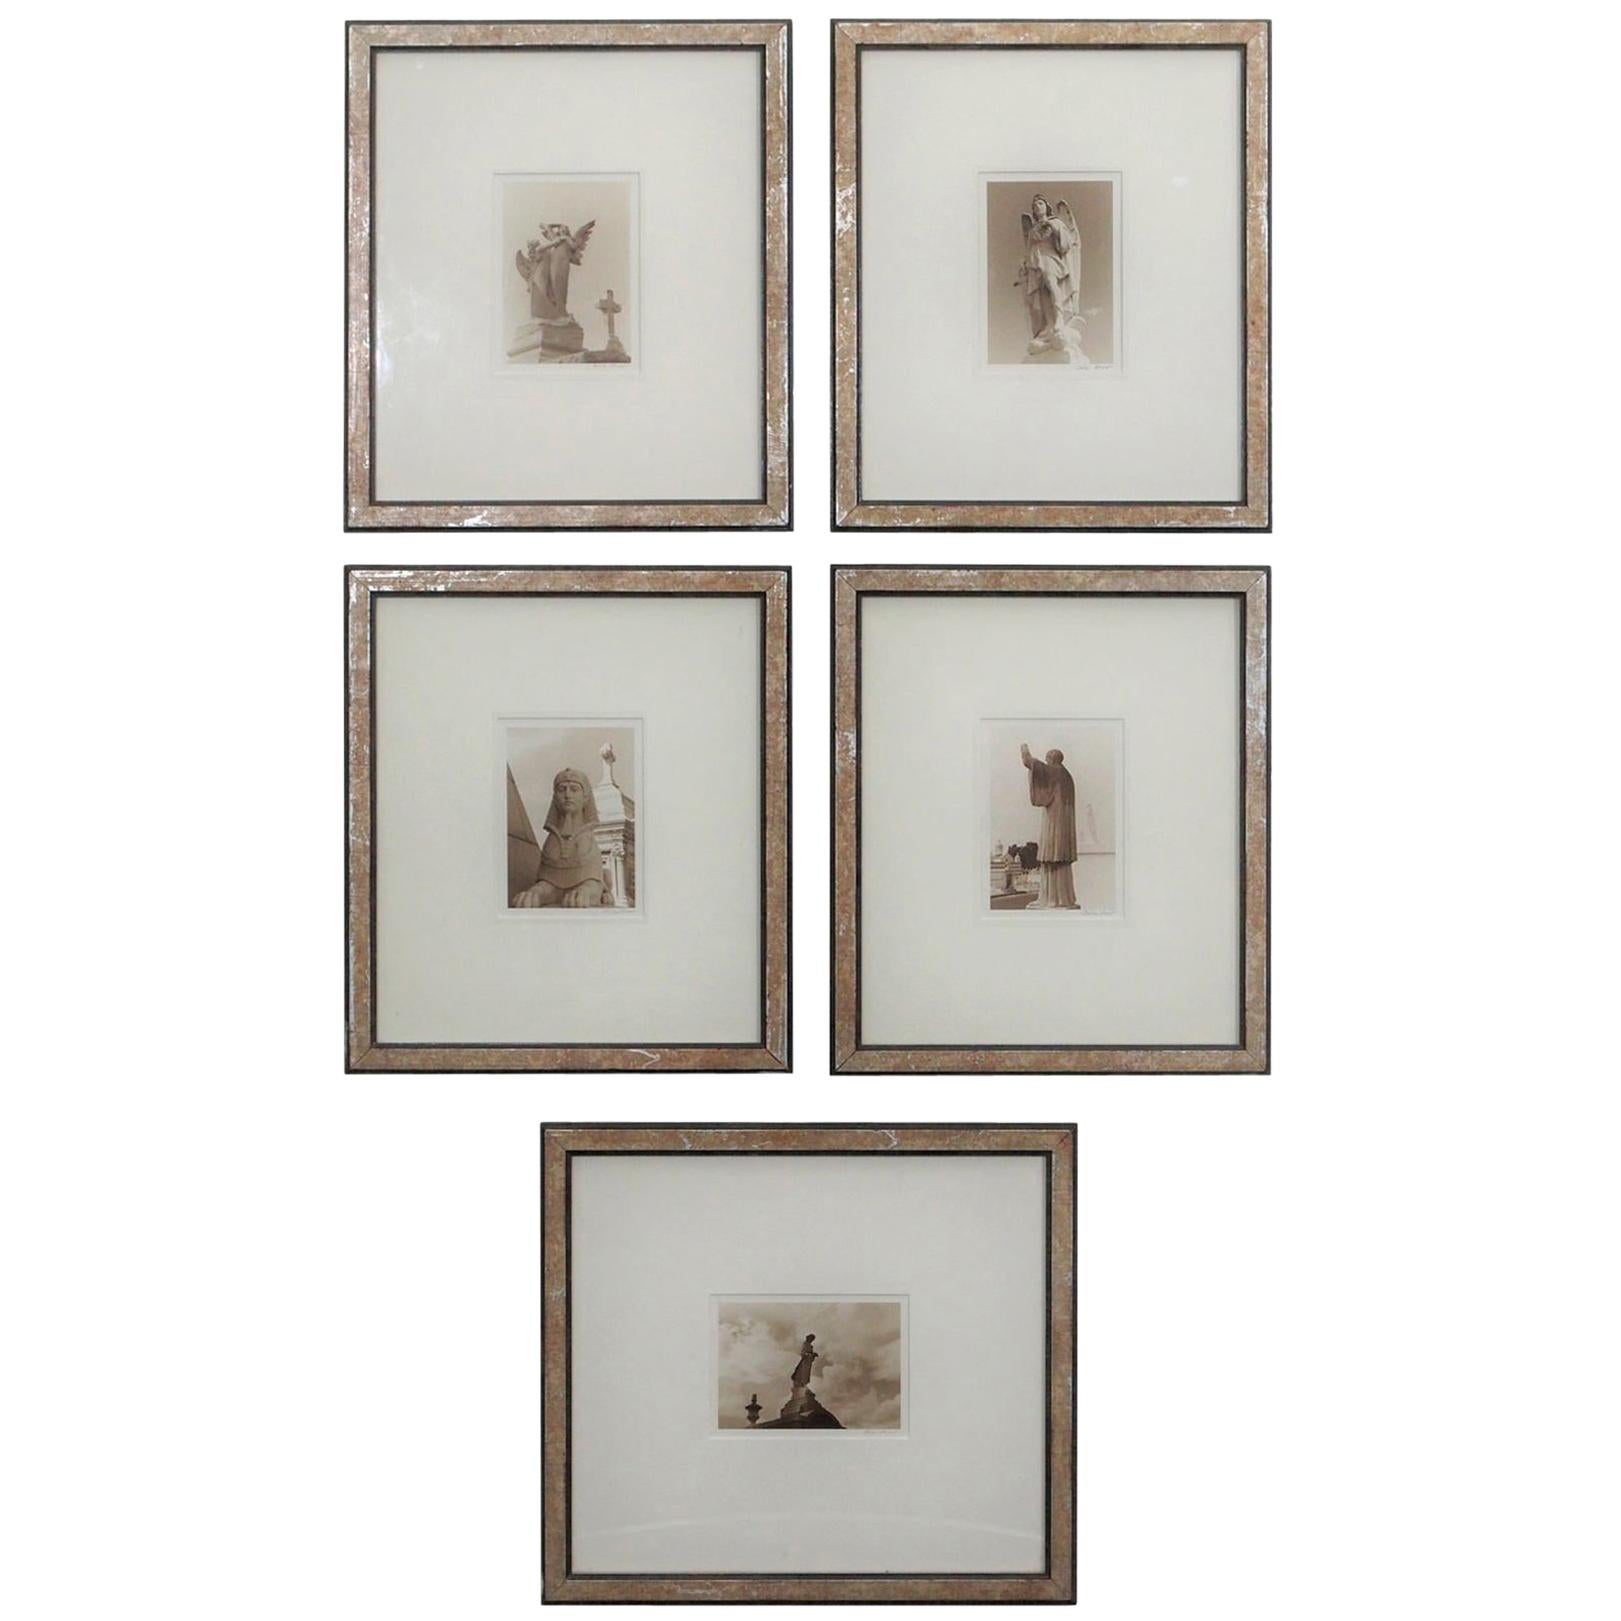 Set of 5 Cemetery Pictures, Photography of New Orleans in Sepia, Framed For Sale